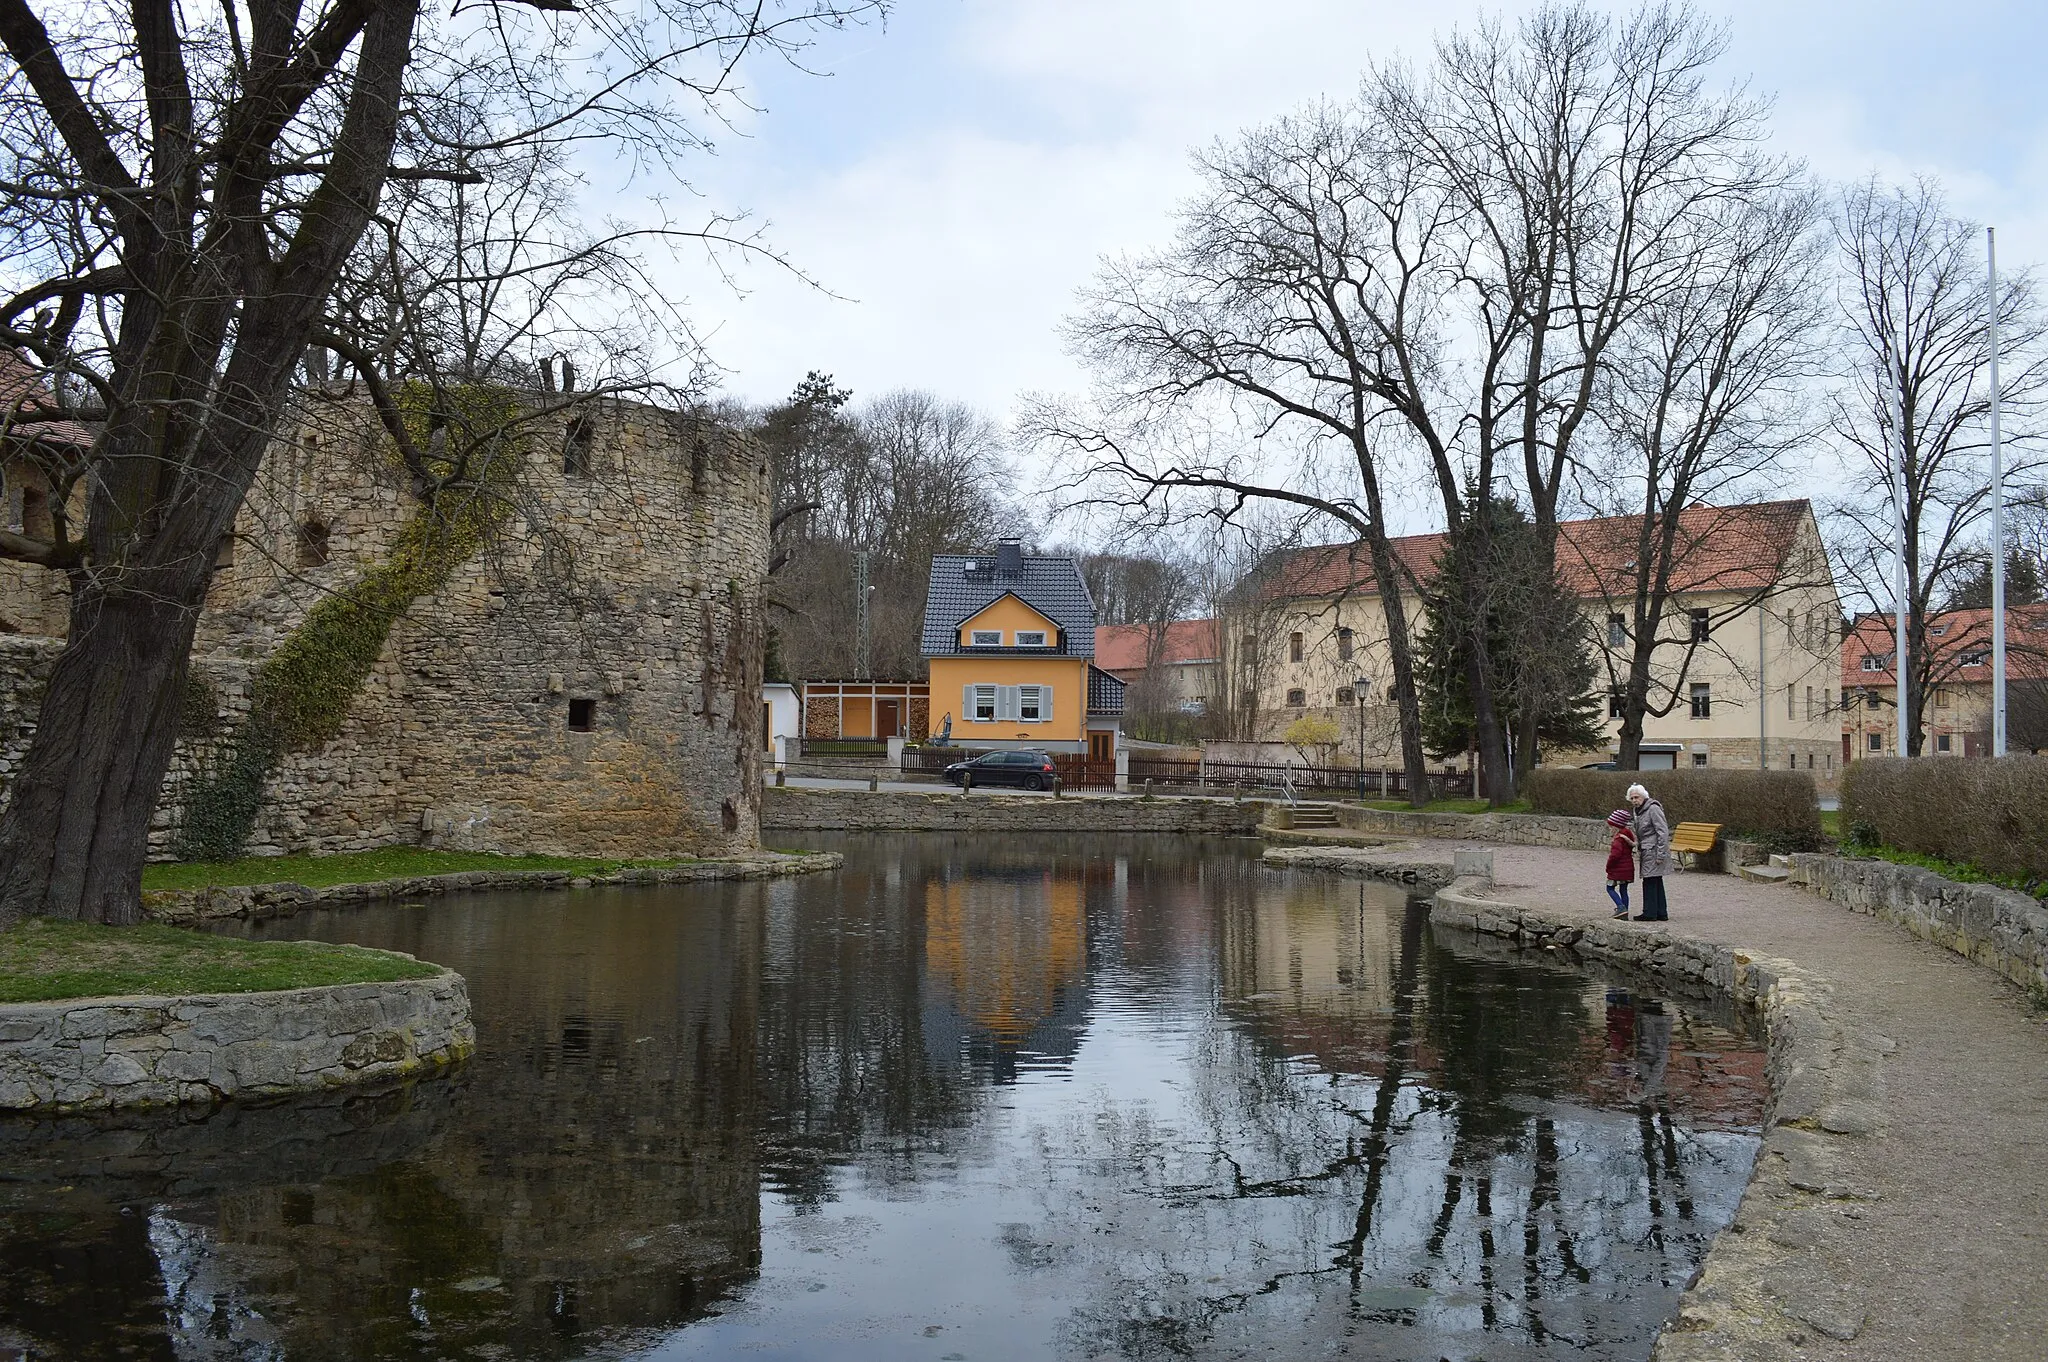 Photo showing: Schkölen, Saale-Holzland district, Thuringia, Germany, in April 2015: Water castle